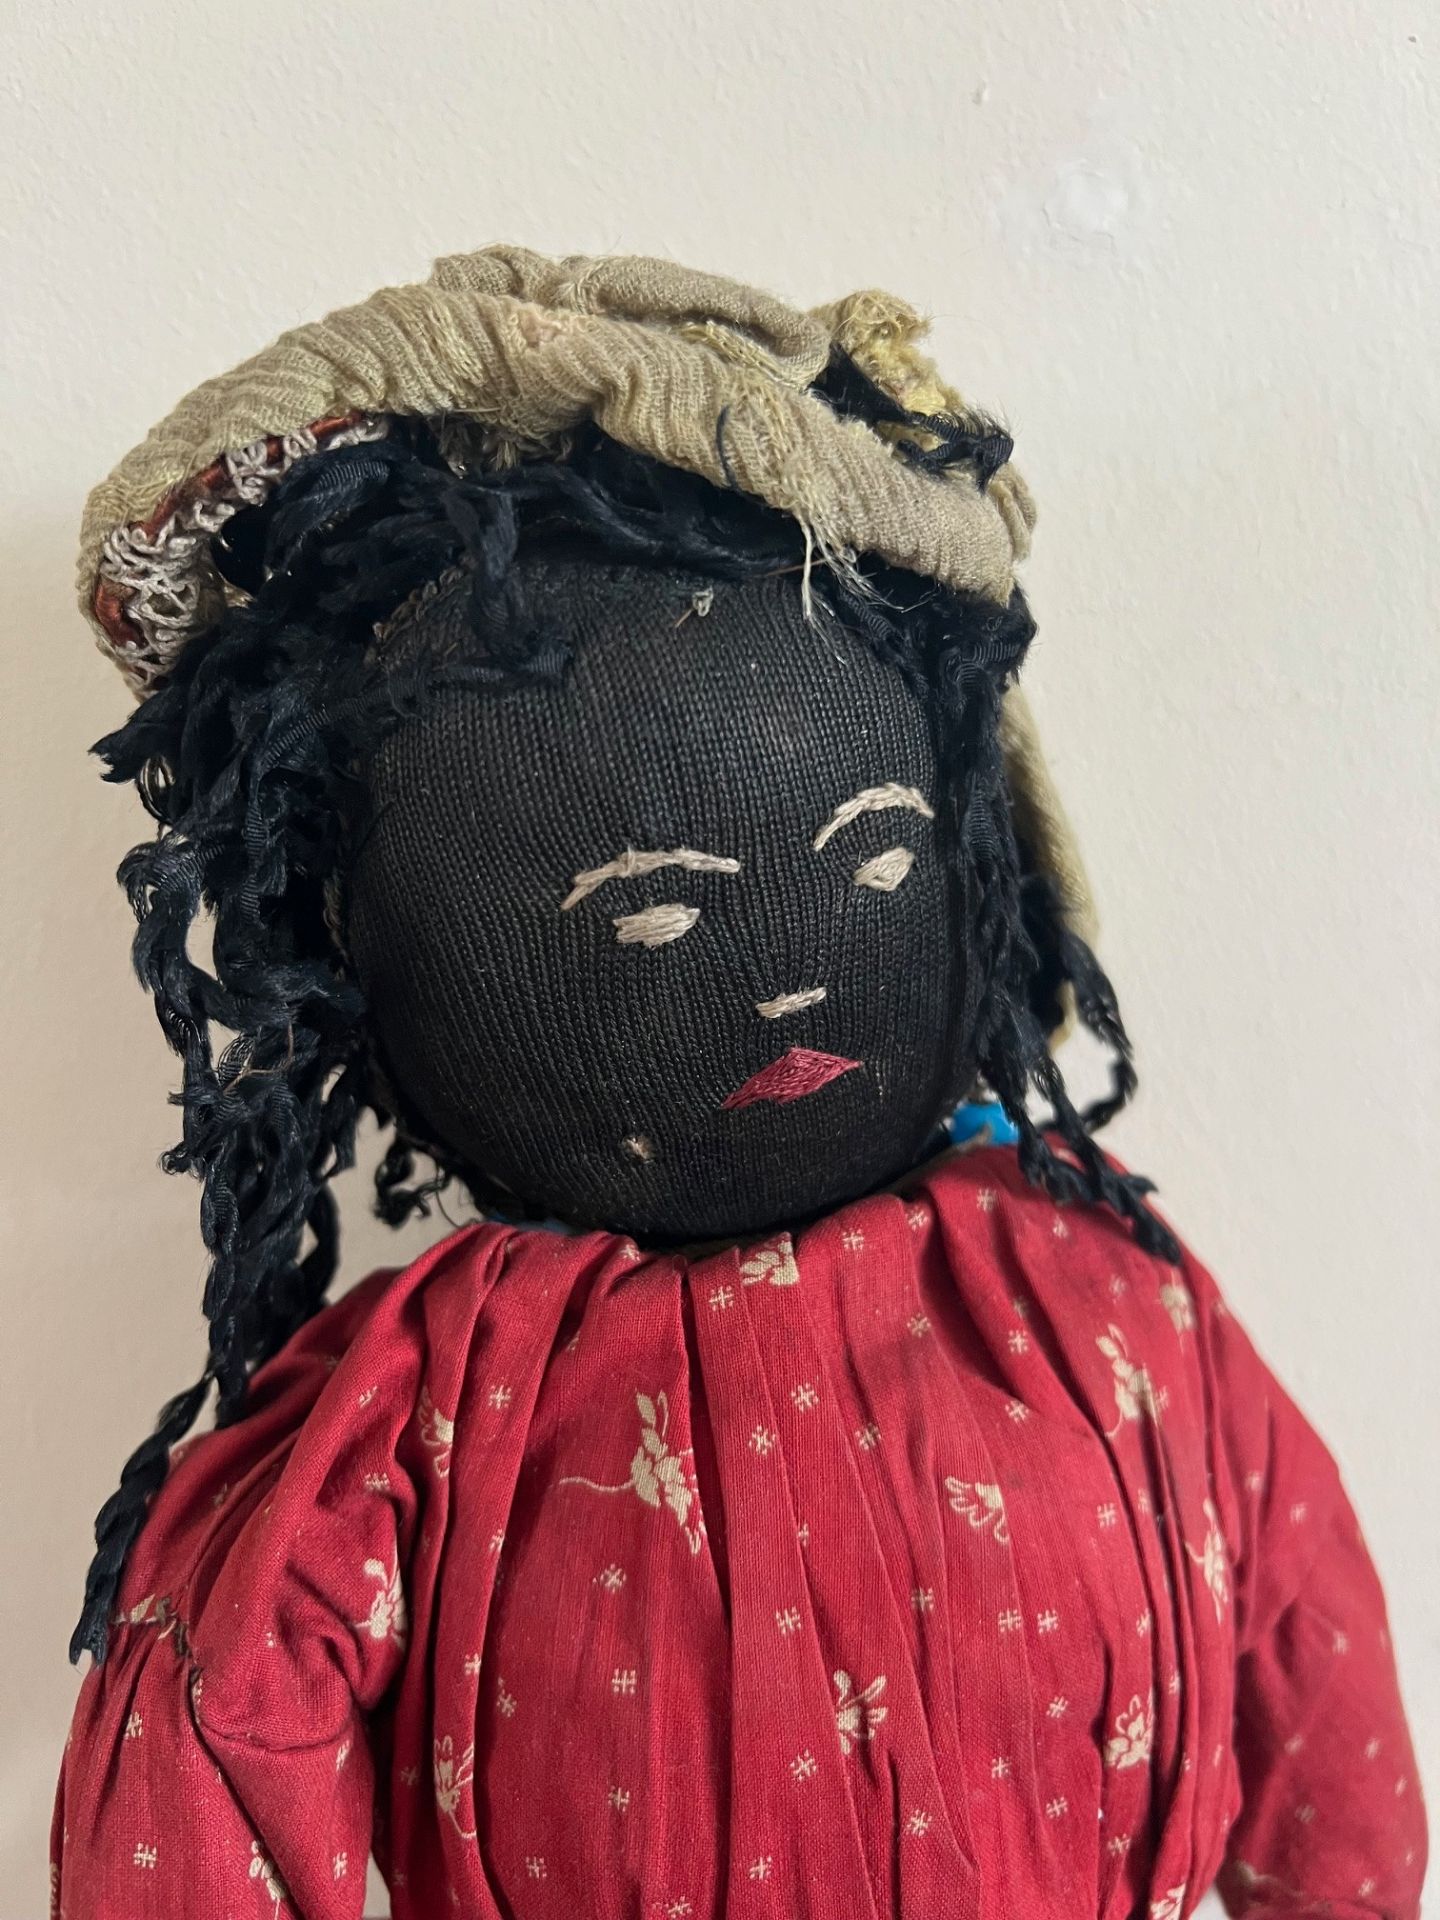 EARLY 20th CENTURY CHARACTER DOLL, PROBABLY ORIGINAL CLOTHING, APPROX 22cm LONG - Image 3 of 3